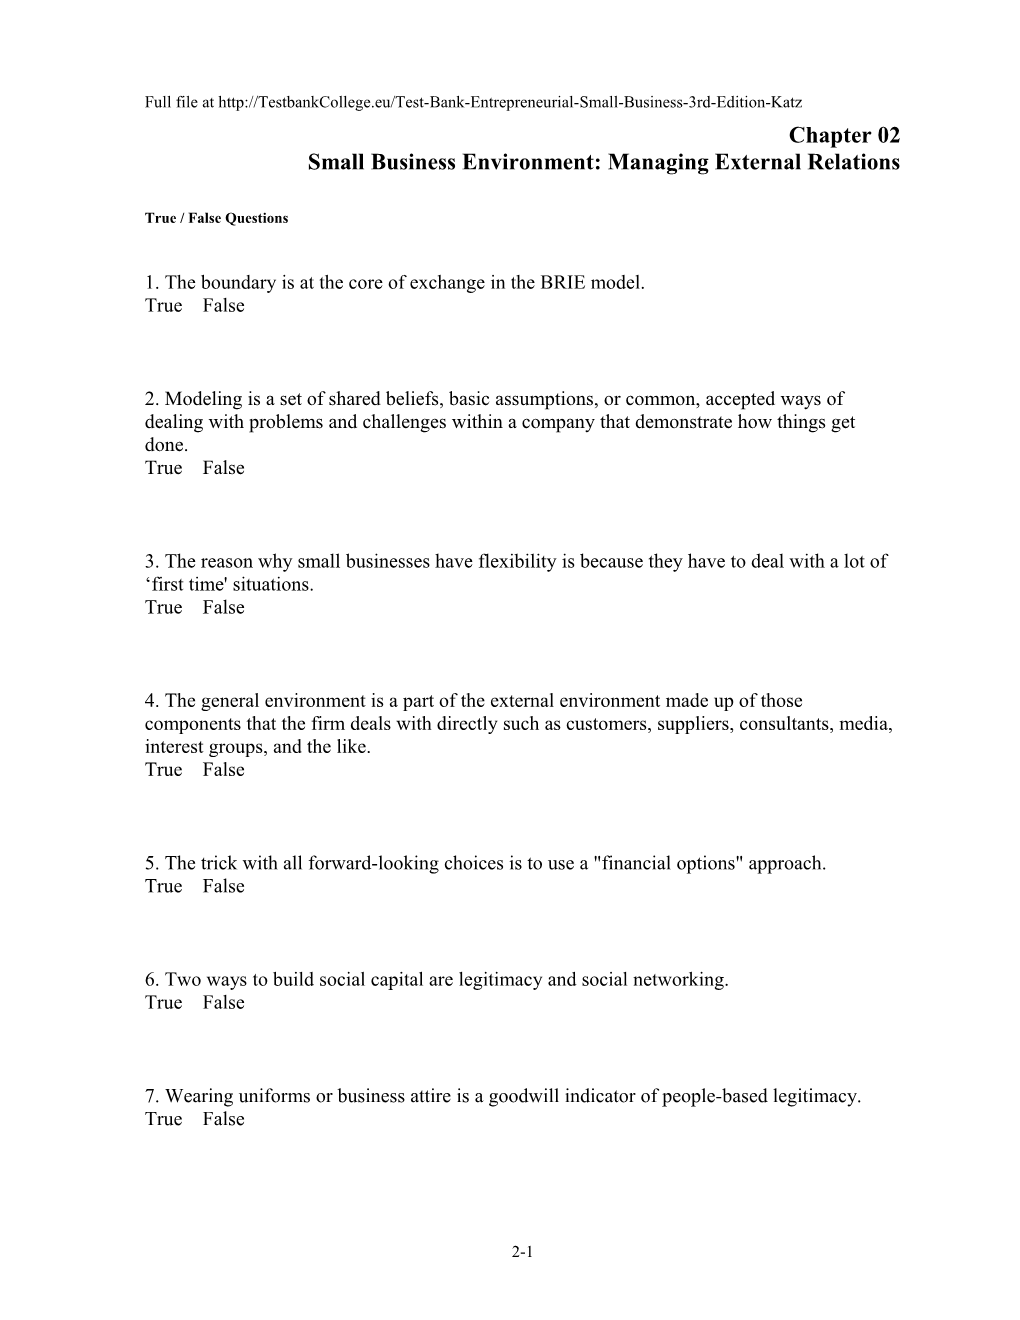 Chapter 02 Small Business Environment: Managing External Relations